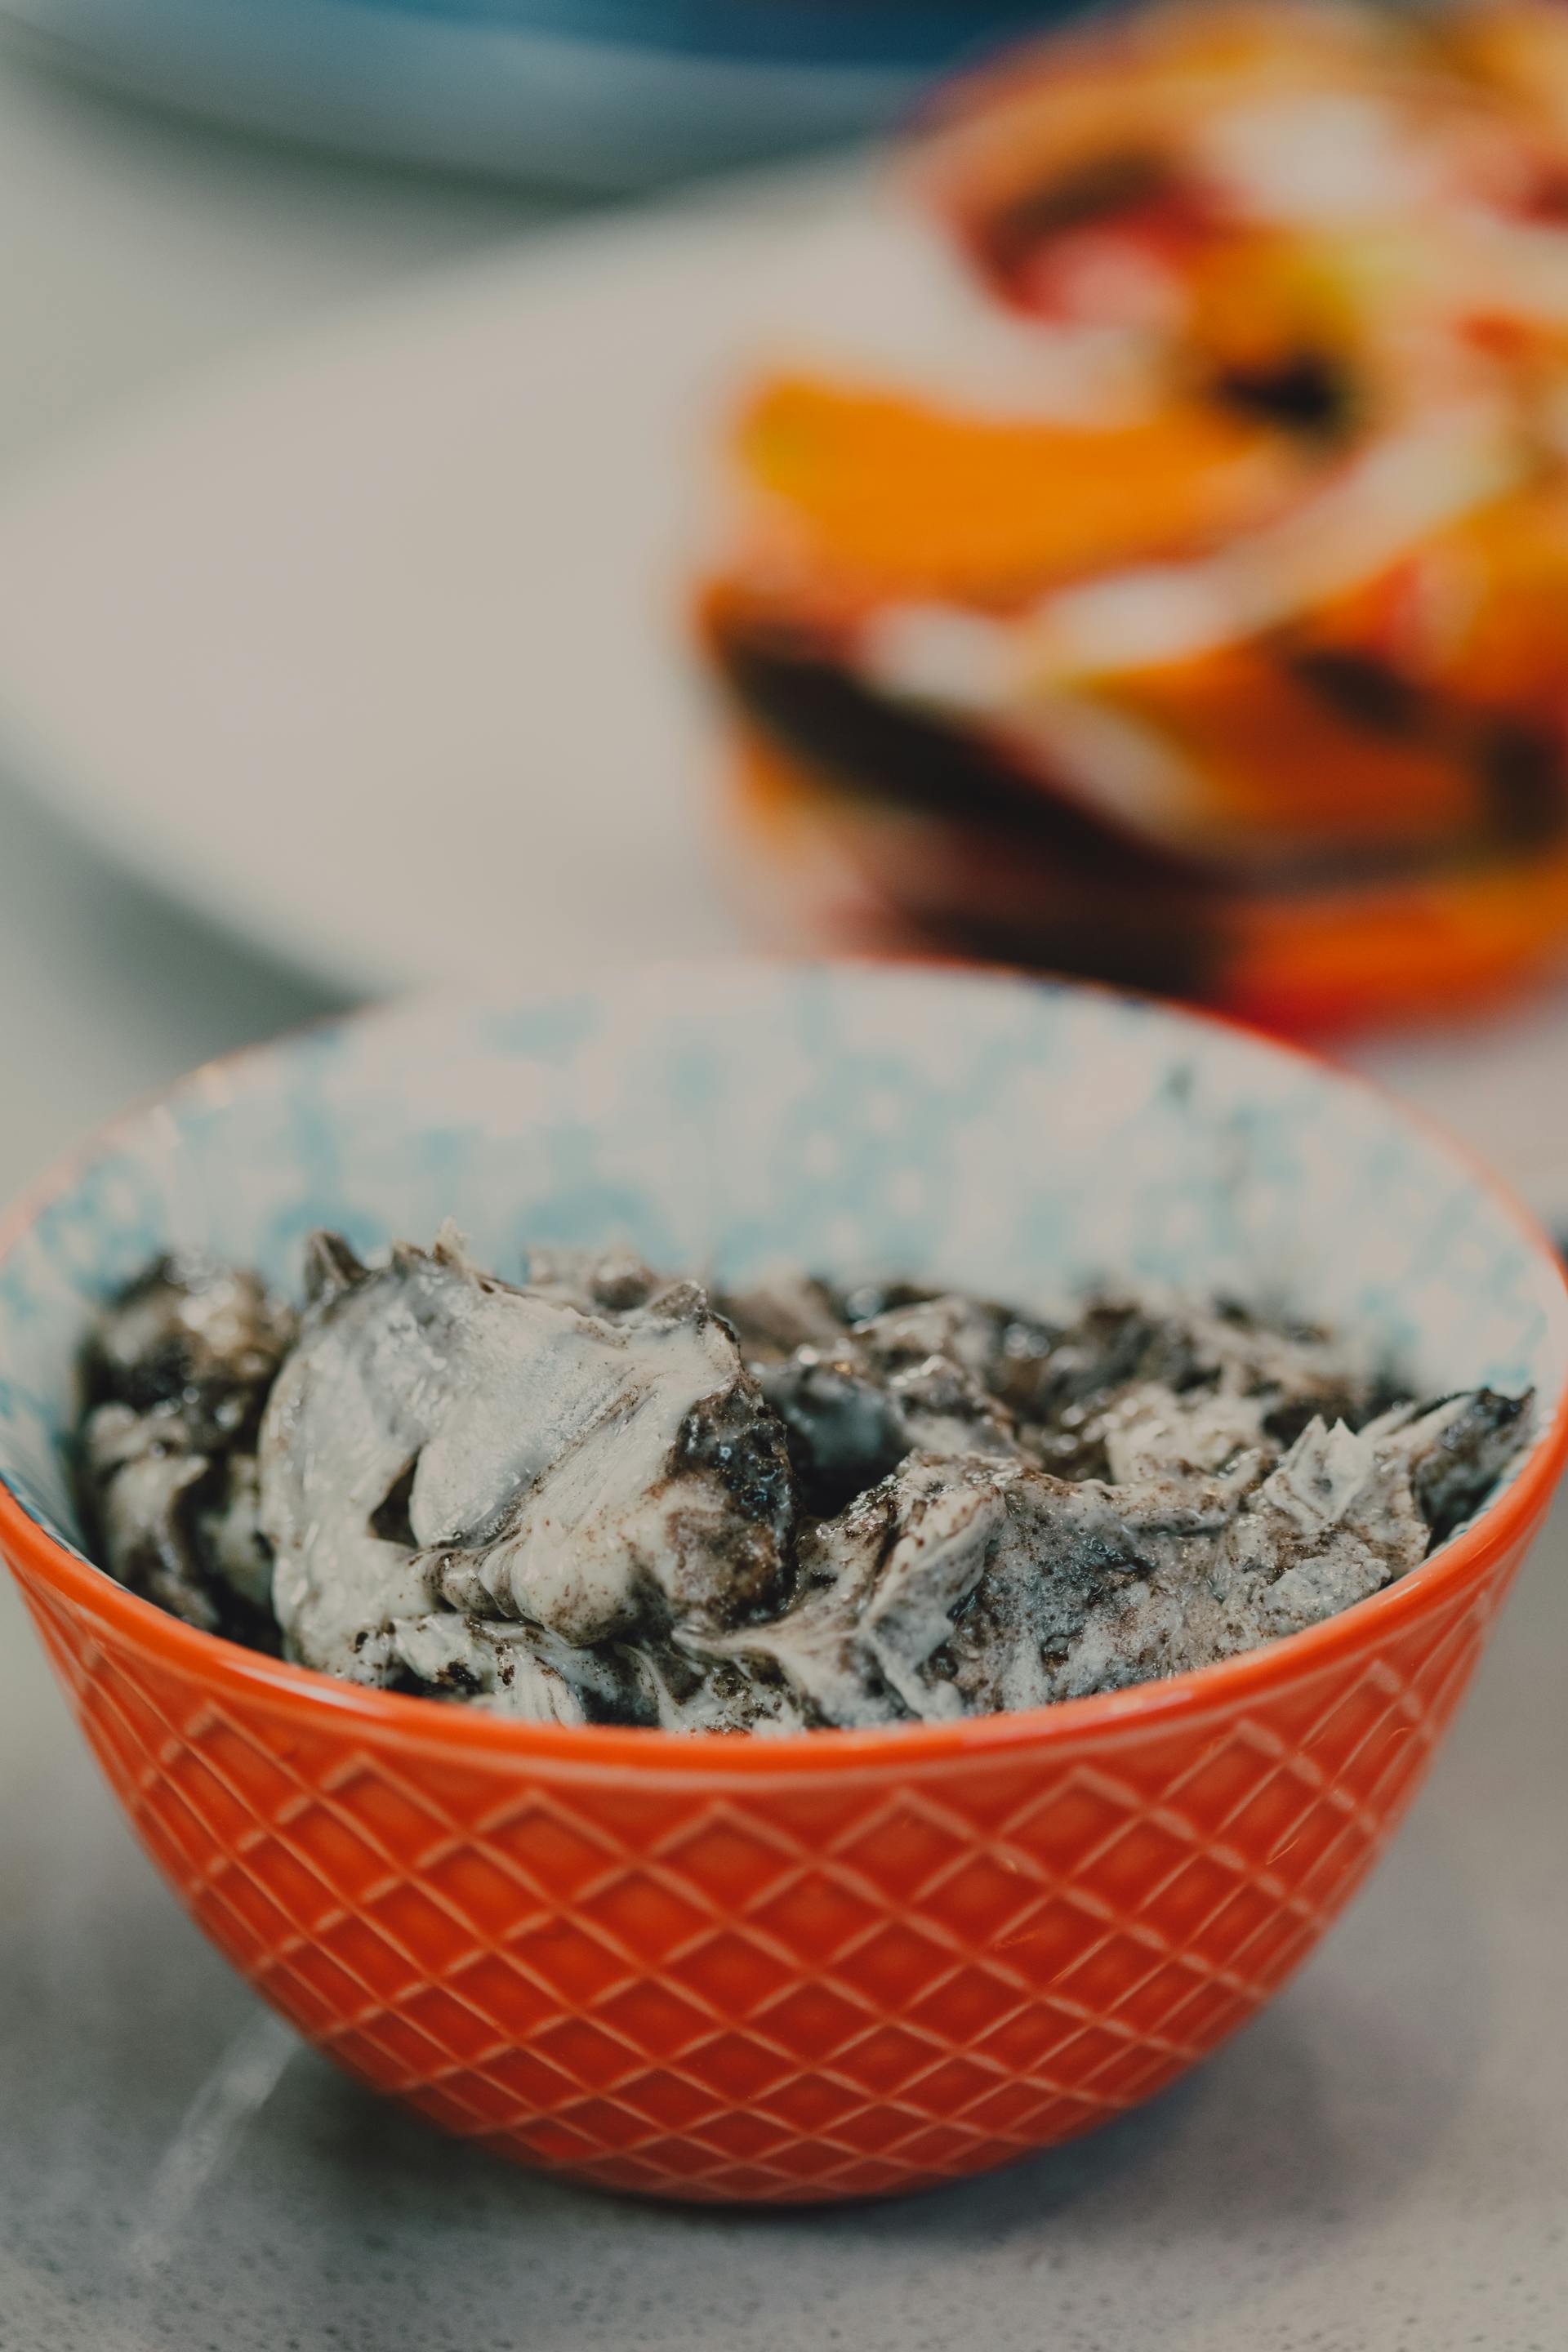 A bowl of ice cream | Source: Pexels